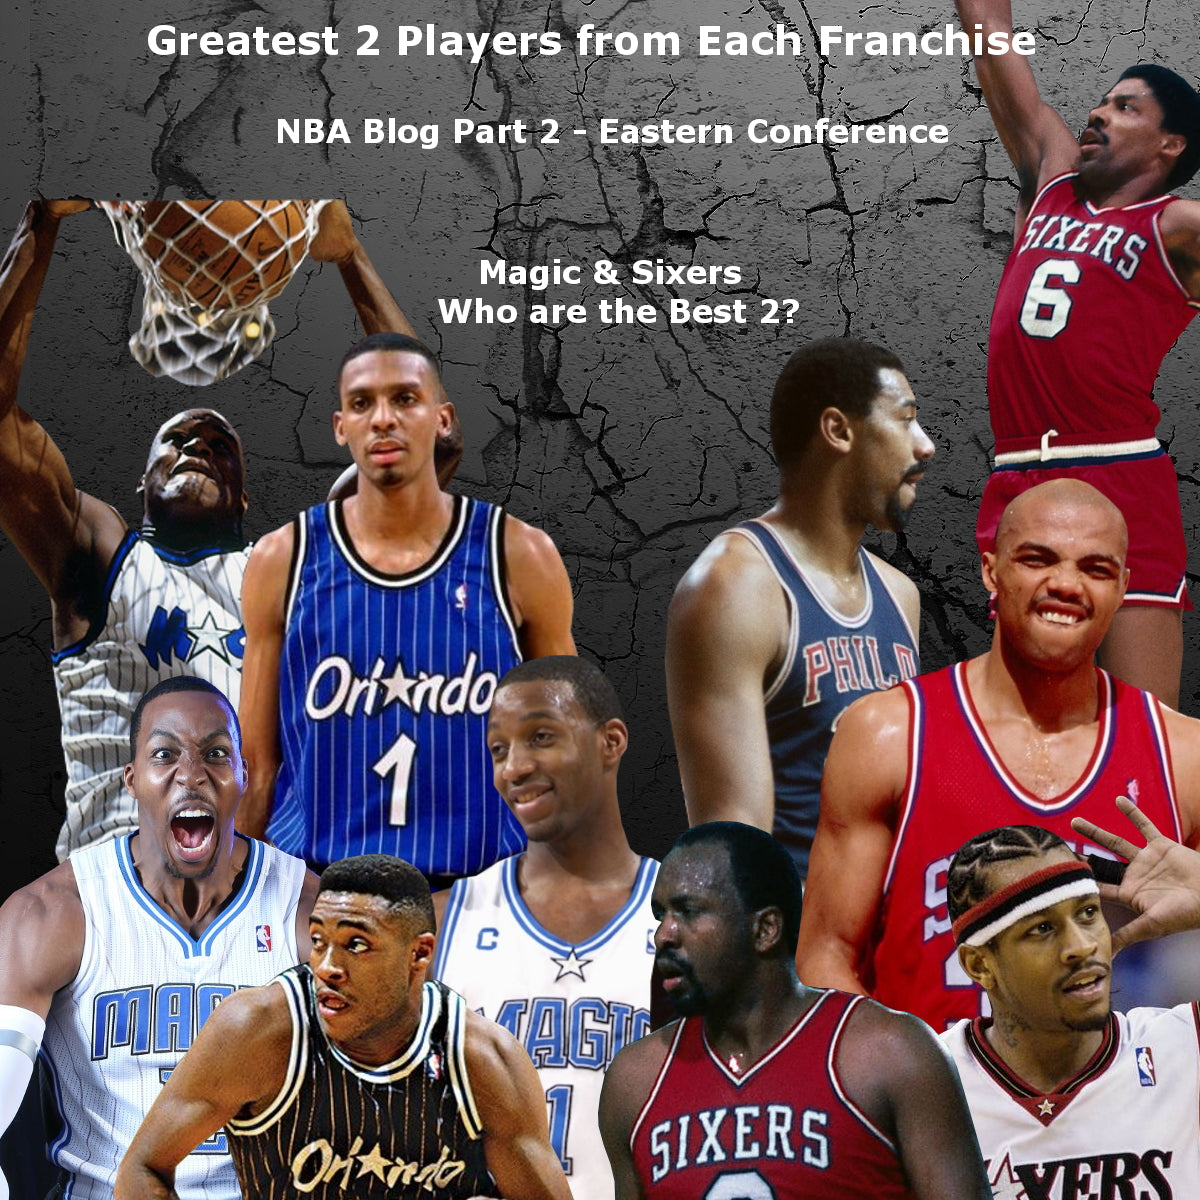  Page 2: All-Time Greatest Roster